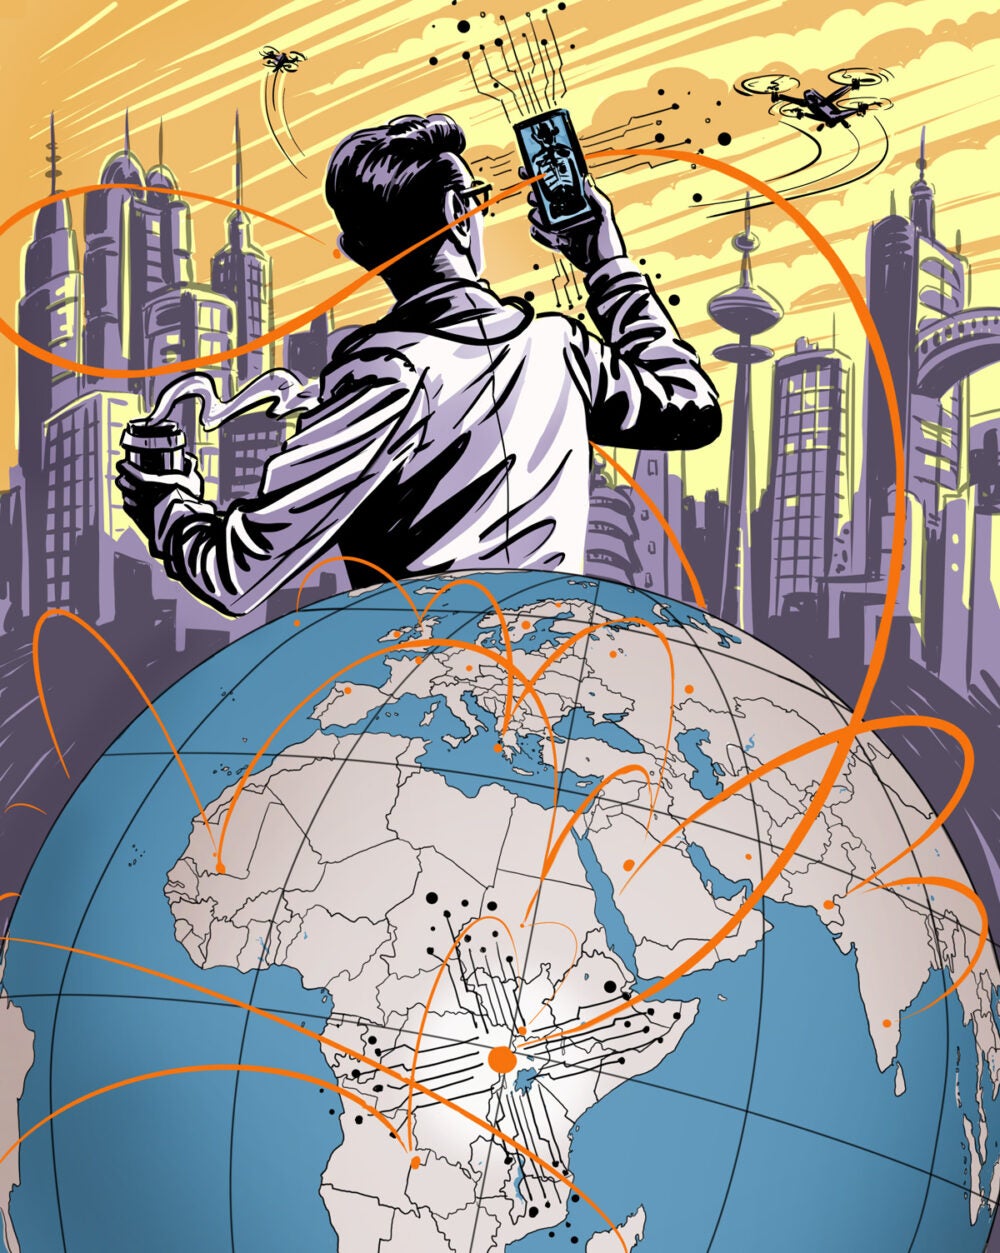 Comic book style illustration with globe in forground, modern urban city in background. Orange lines spring from dots around the globe and into the air. A mecial professional stands behind the globe, back turned, holding a coffee in one hand, looking at a phone in the other at unspecified health information. Drones and helicopters fly in the sky. City is drawn in light purple, sky is orange and yellow.